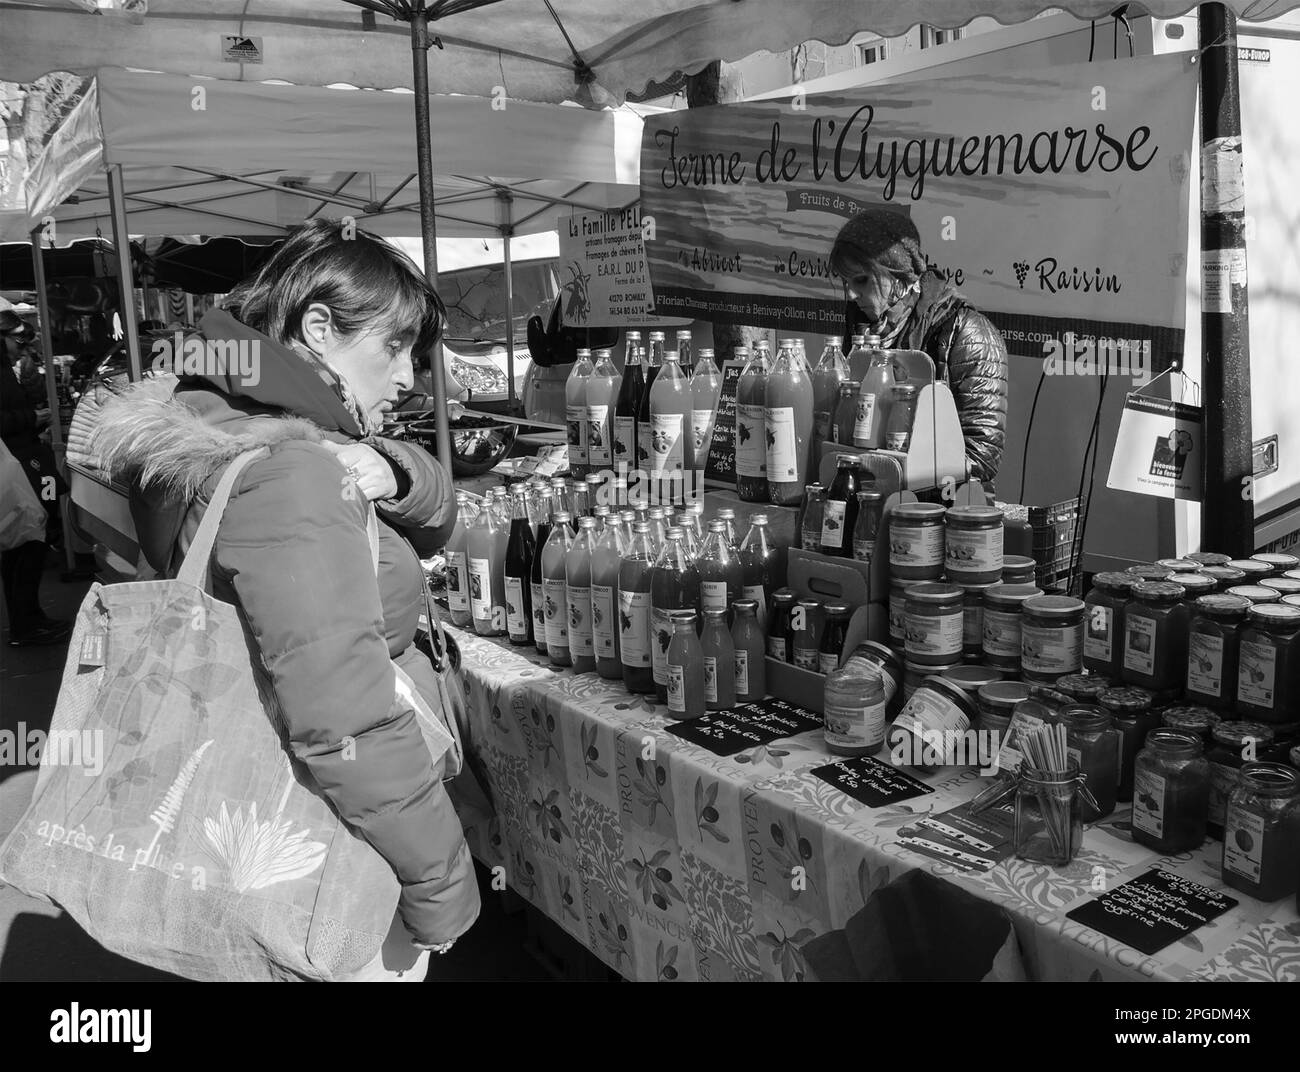 Paris, France - March 12, 2016: Woman choosing jam and juice at local Paris farmer agricultural market. Black white historic photo Stock Photo